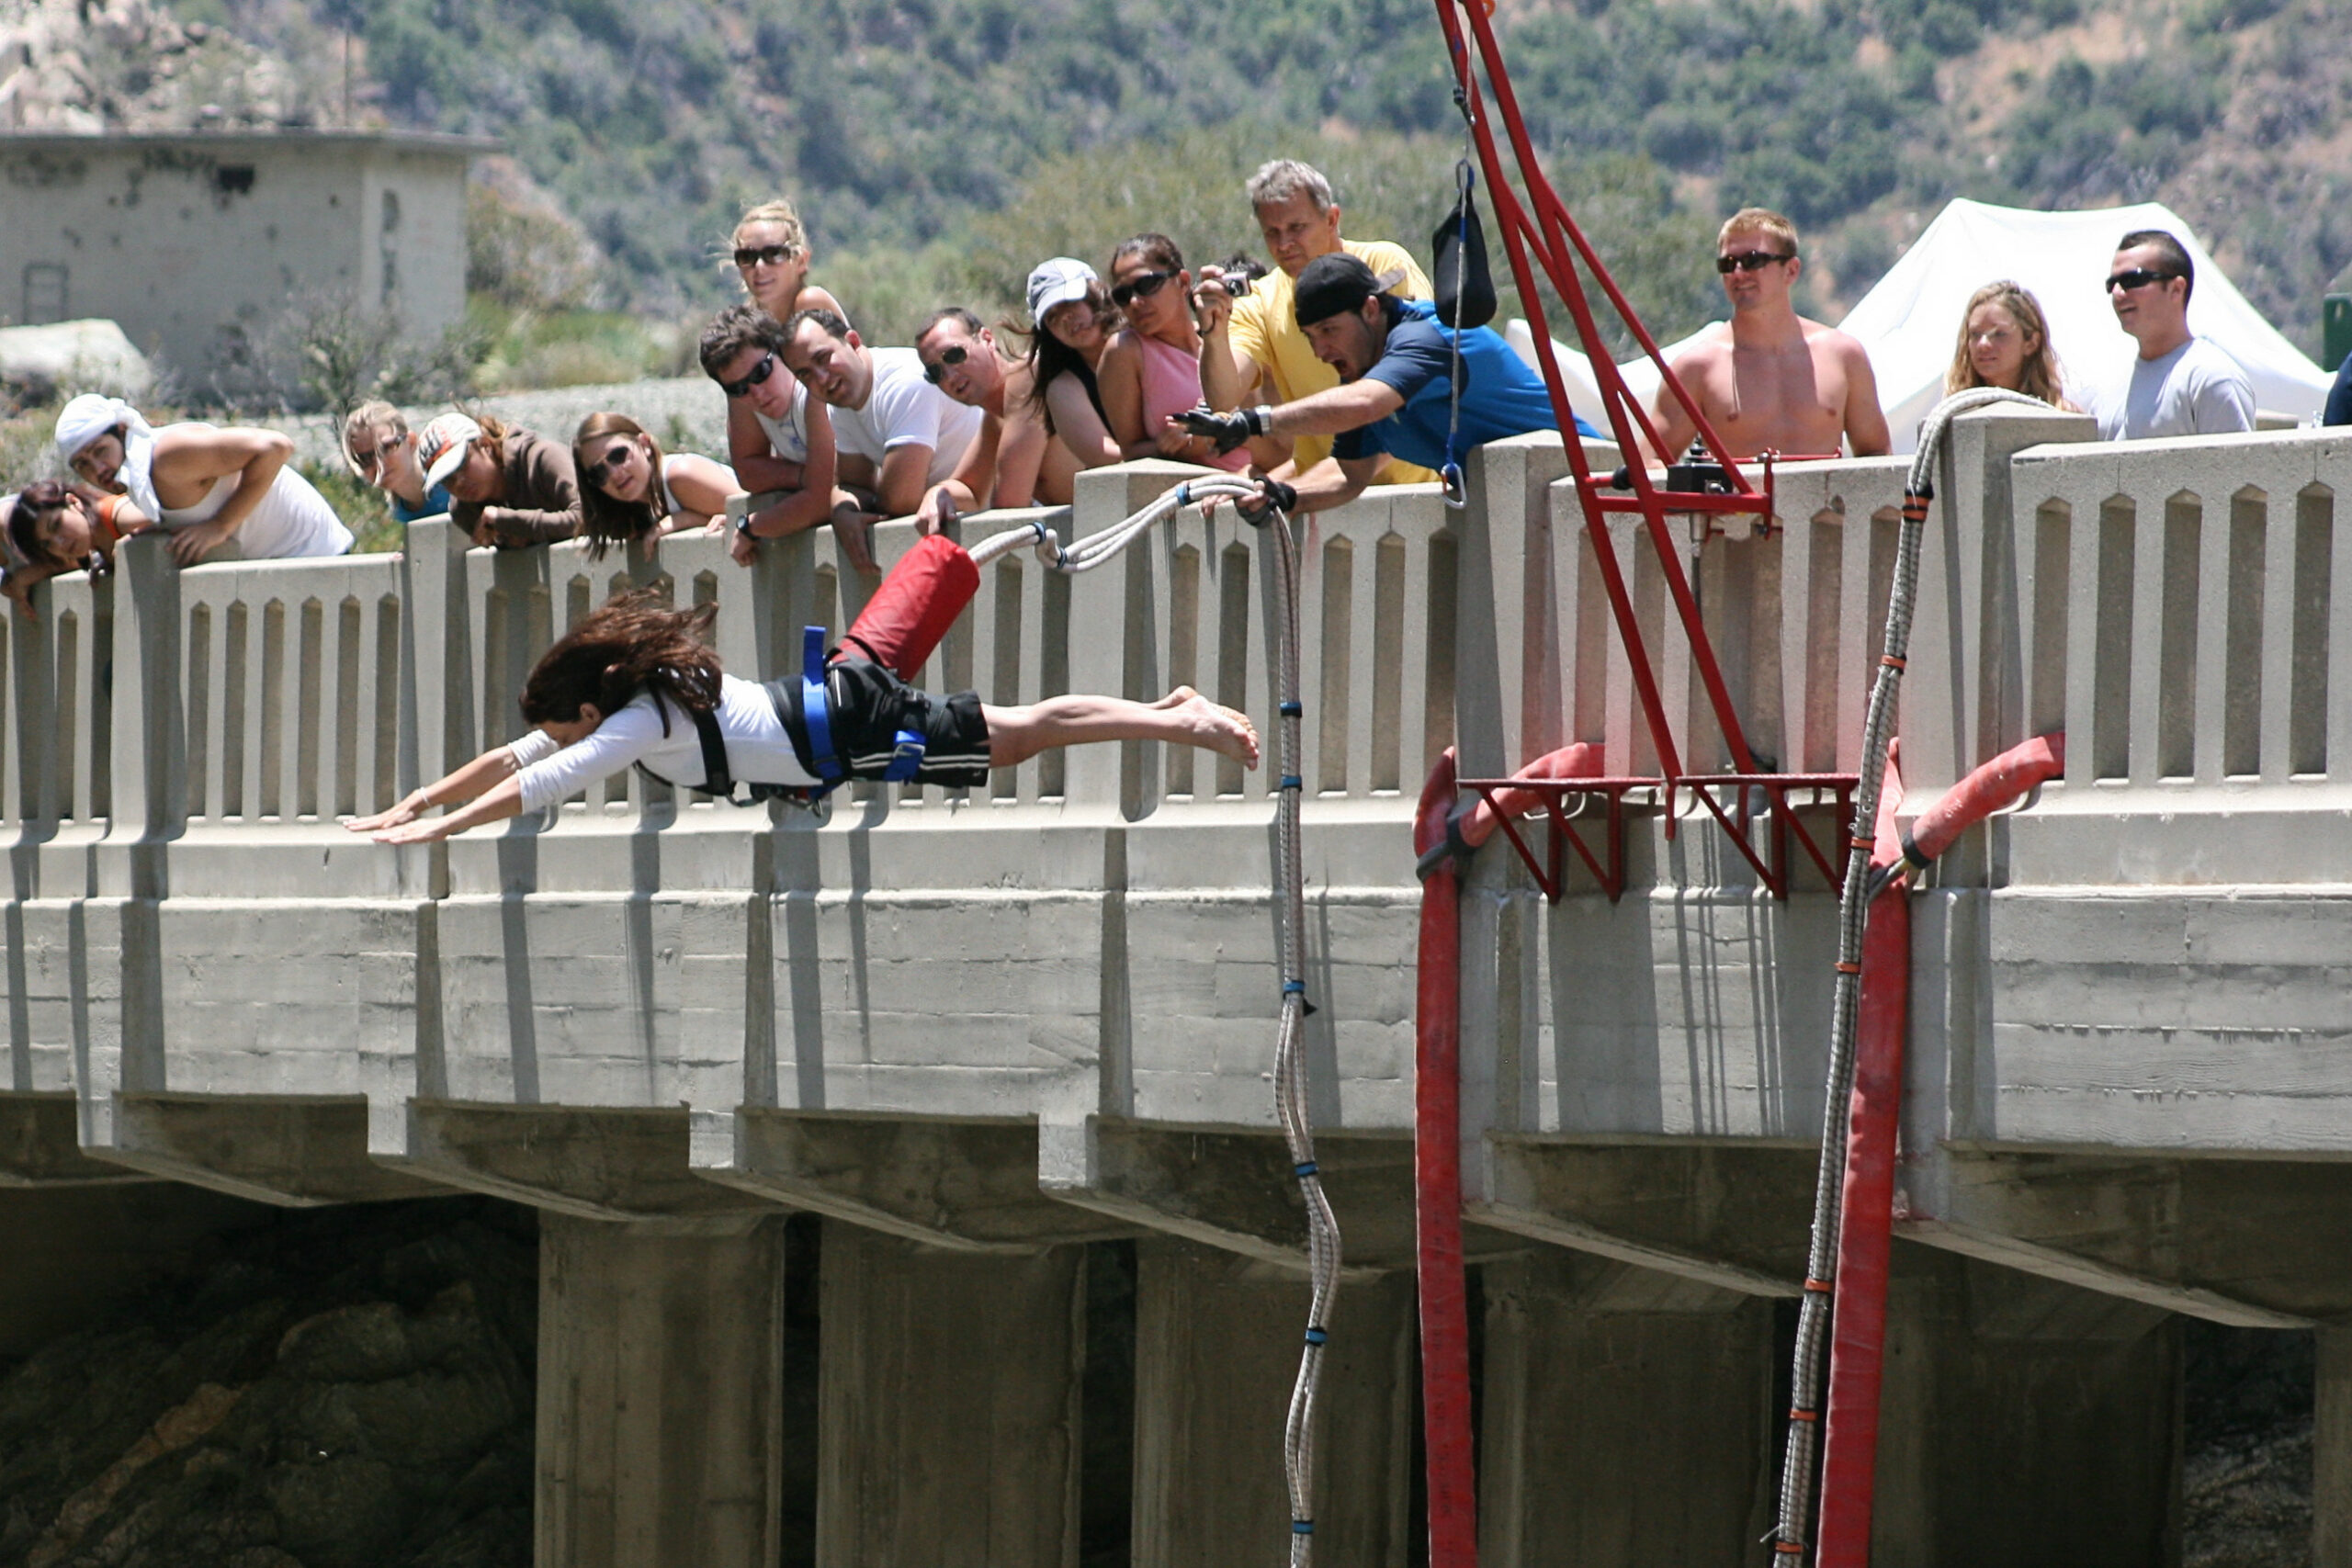 A thrillseeker dives off the Bridge to Nowhere in the San Gabriel Mountains.